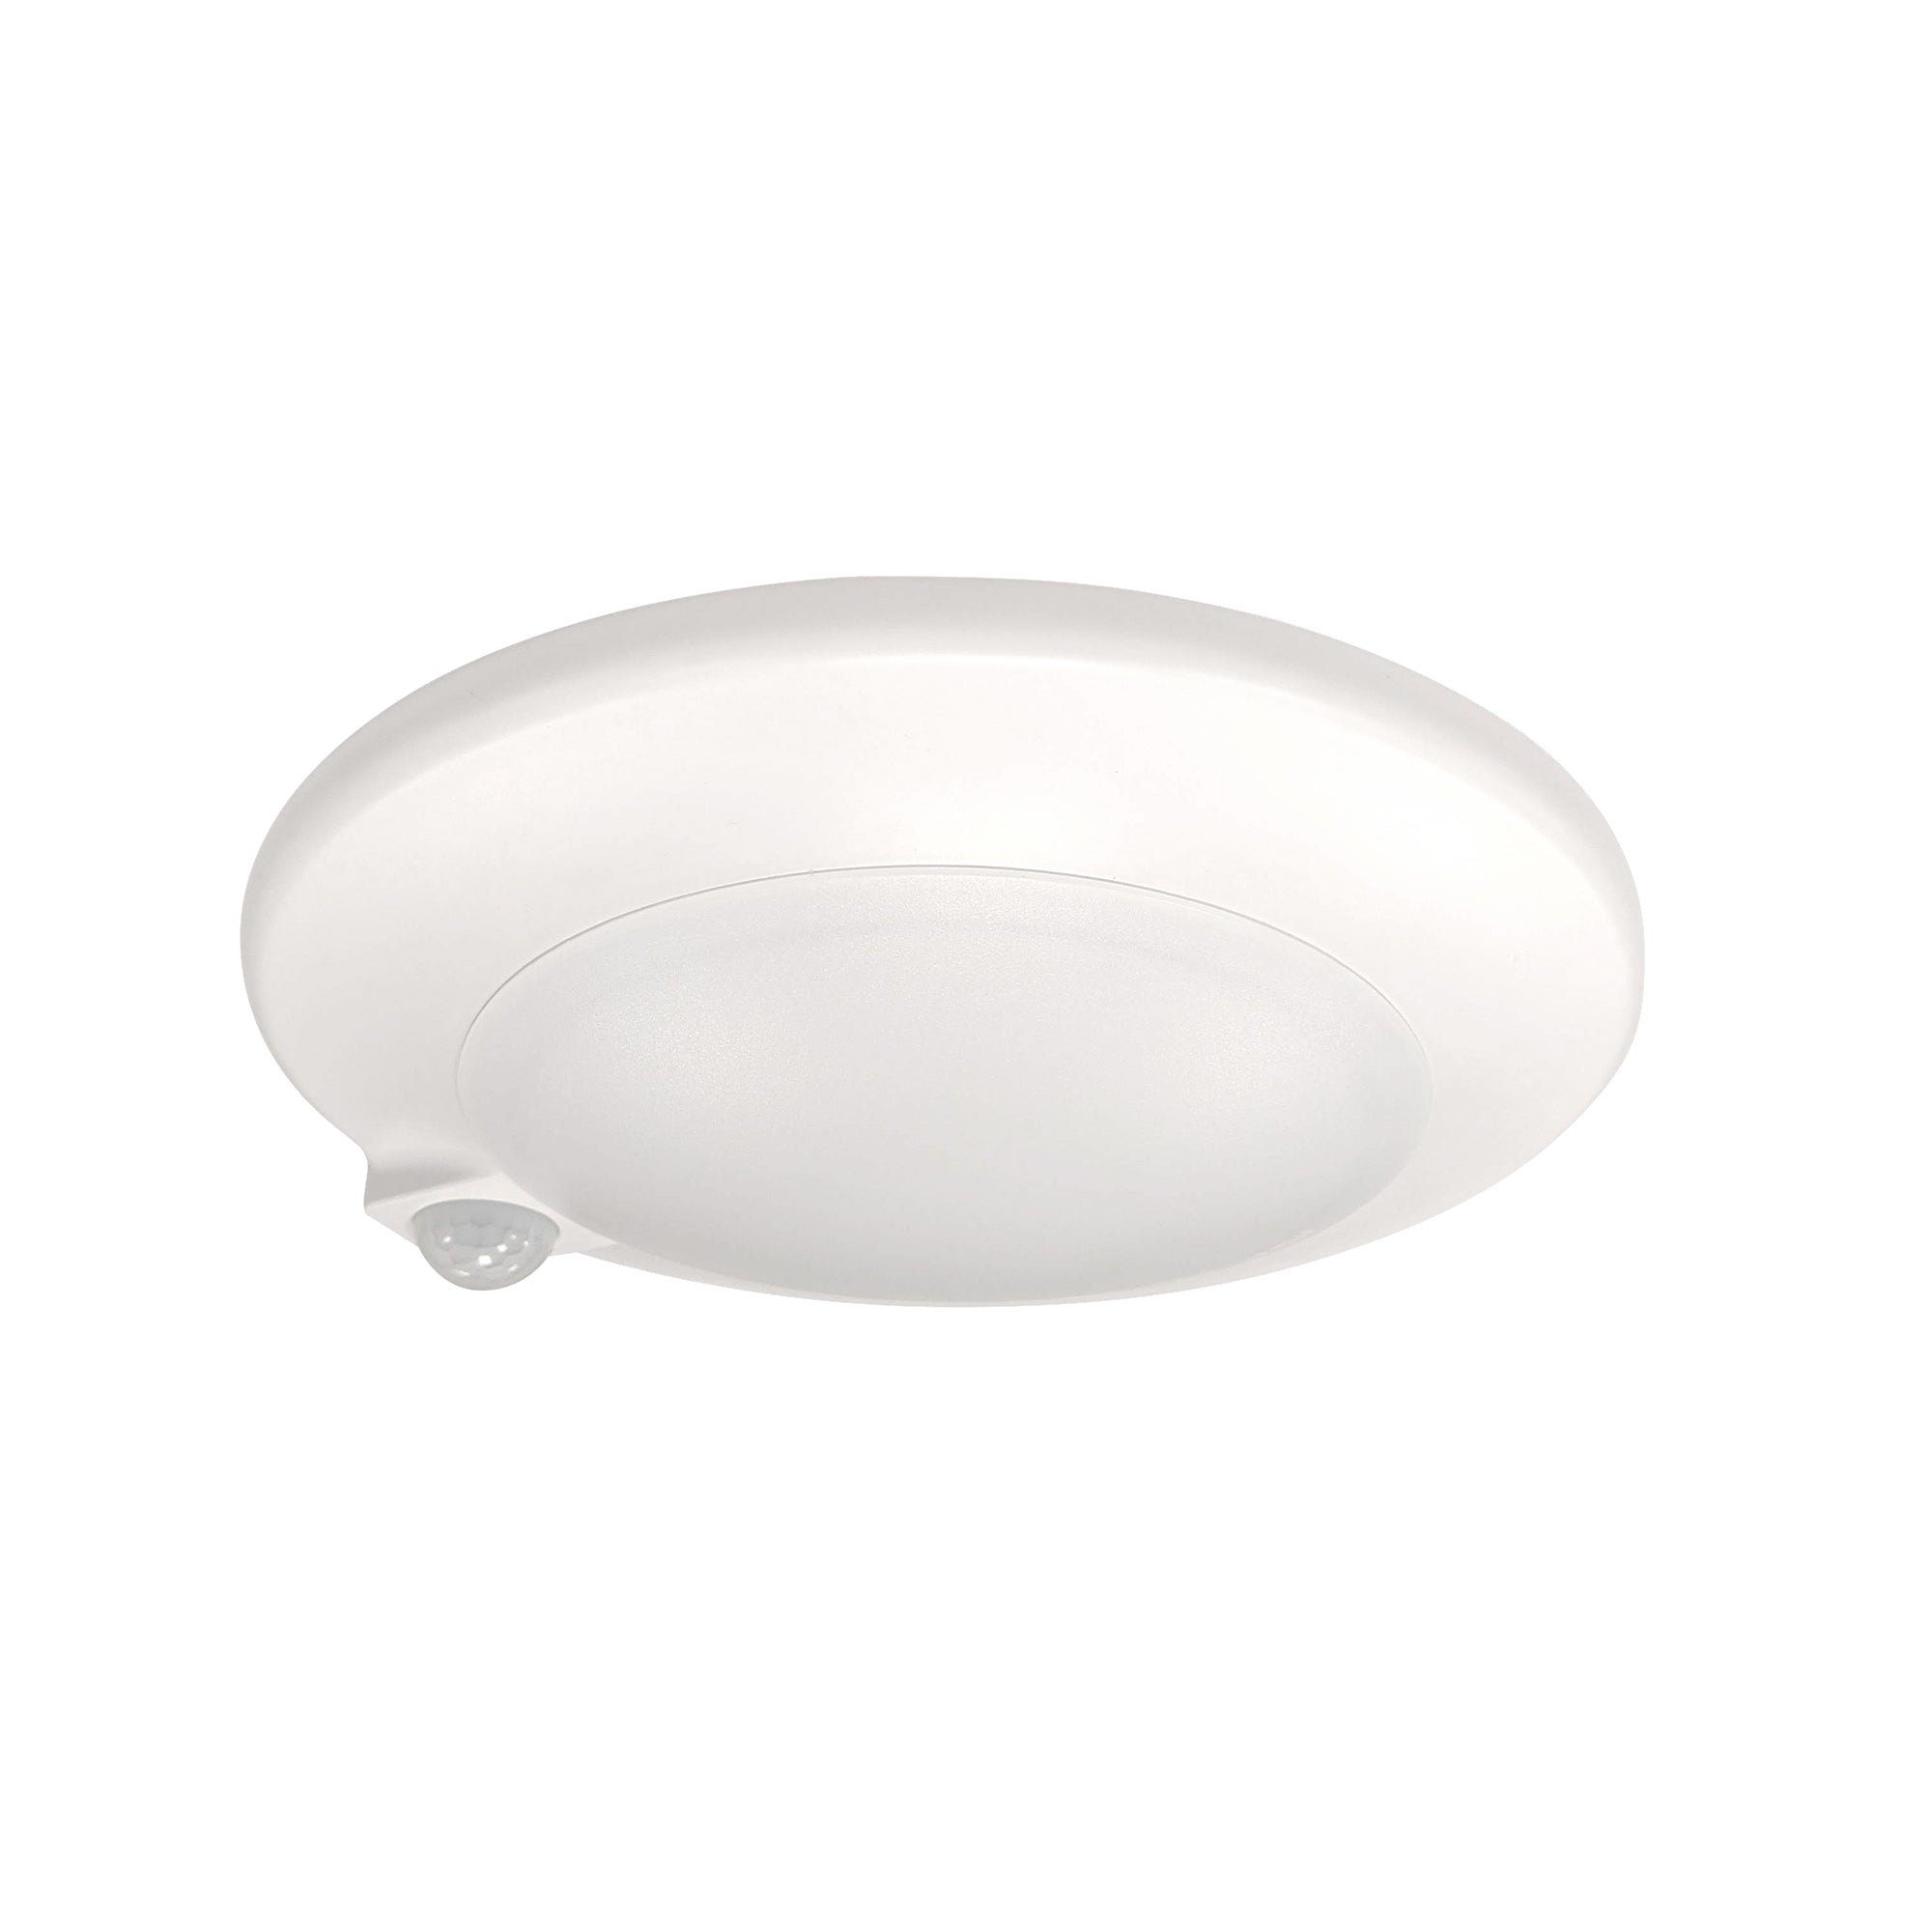 Nora Lighting NLOPAC-R7MS30W - Surface - 7 Inch AC Opal LED Surface Mount with PIR Motion Sensor, 1050lm / 15W, 3000K, White finish